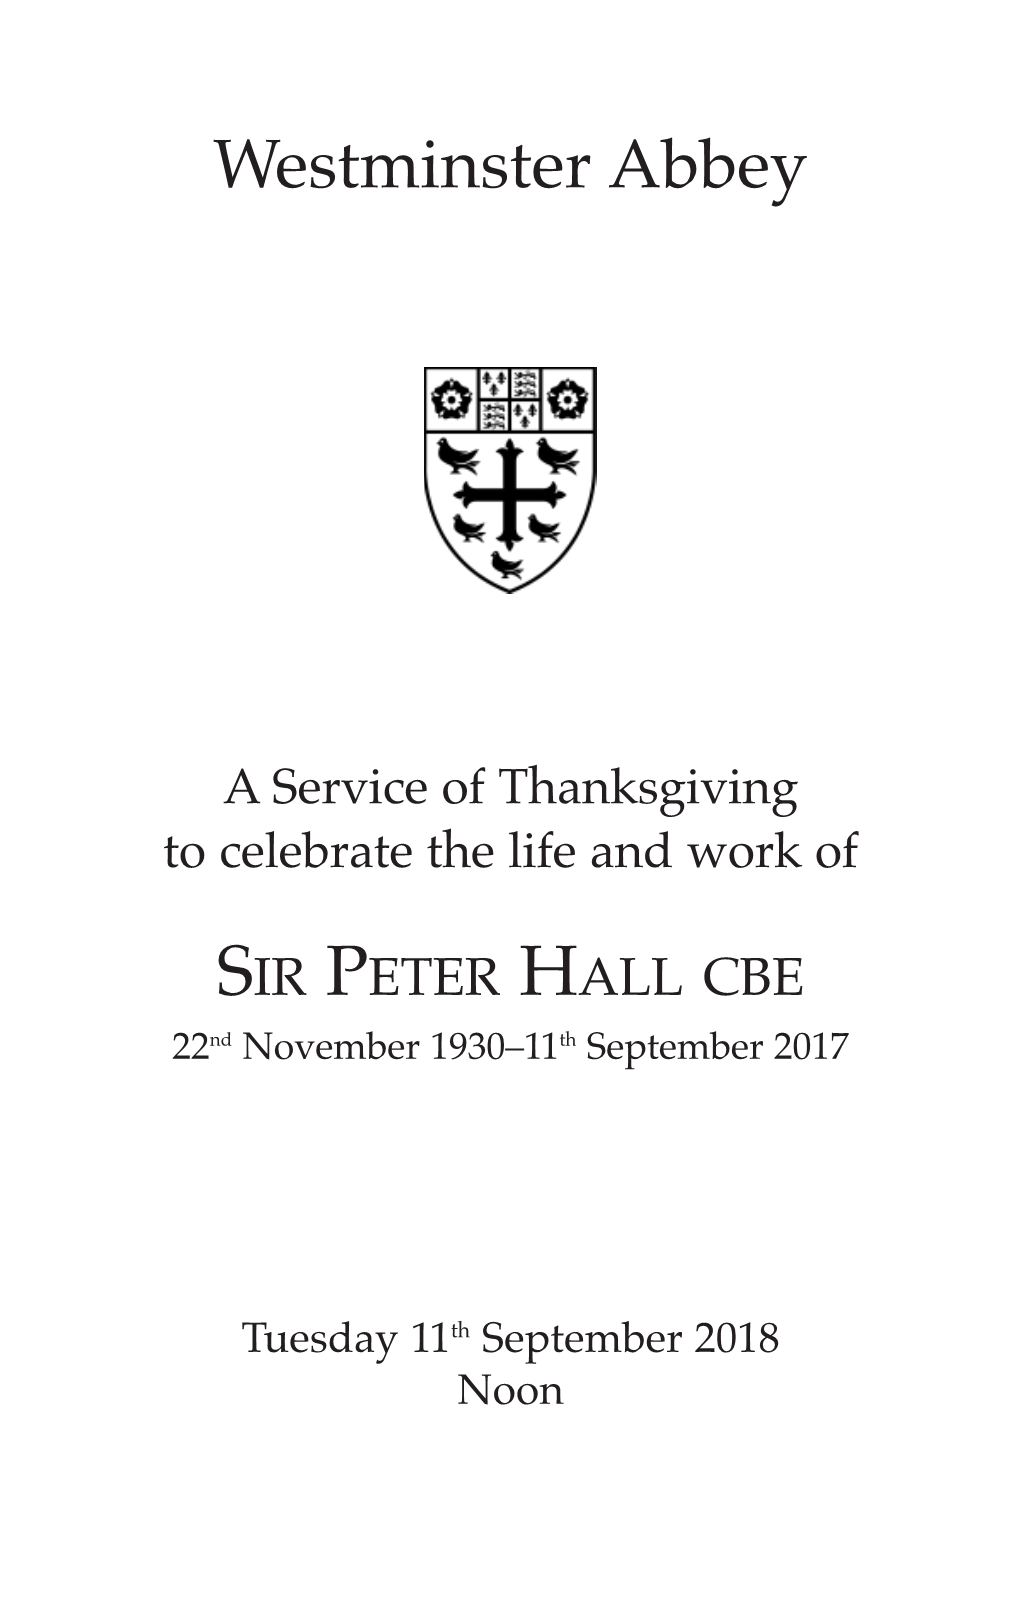 Order of Service for a Service of Thanksgiving